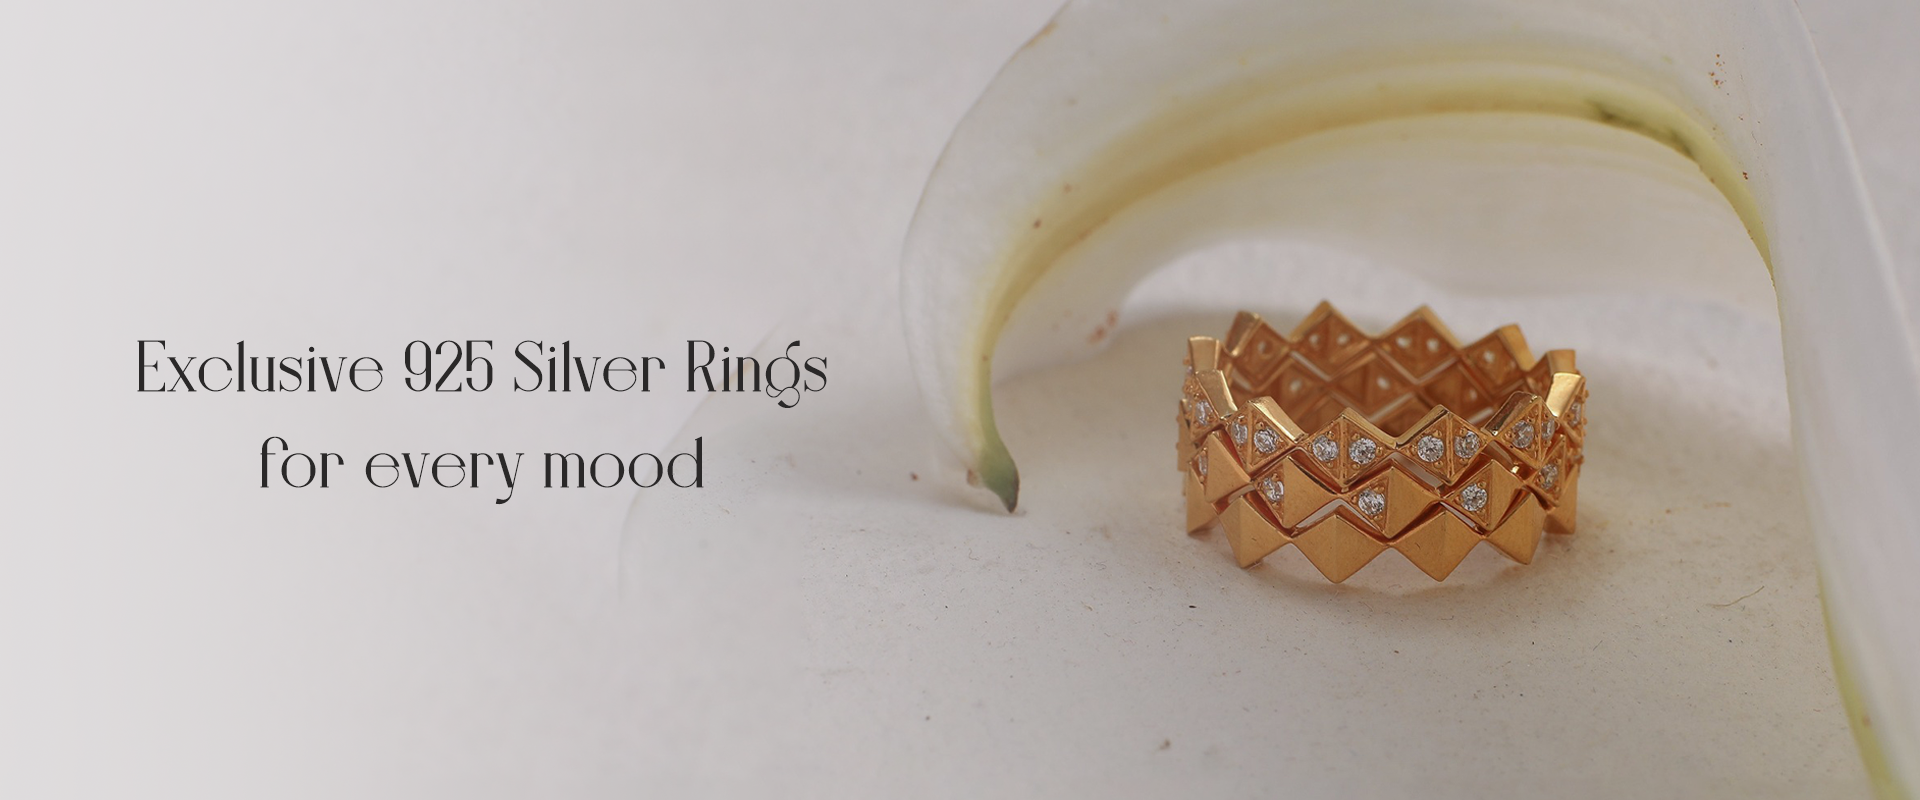 Exclusive 925 Silver Rings for Every Mood